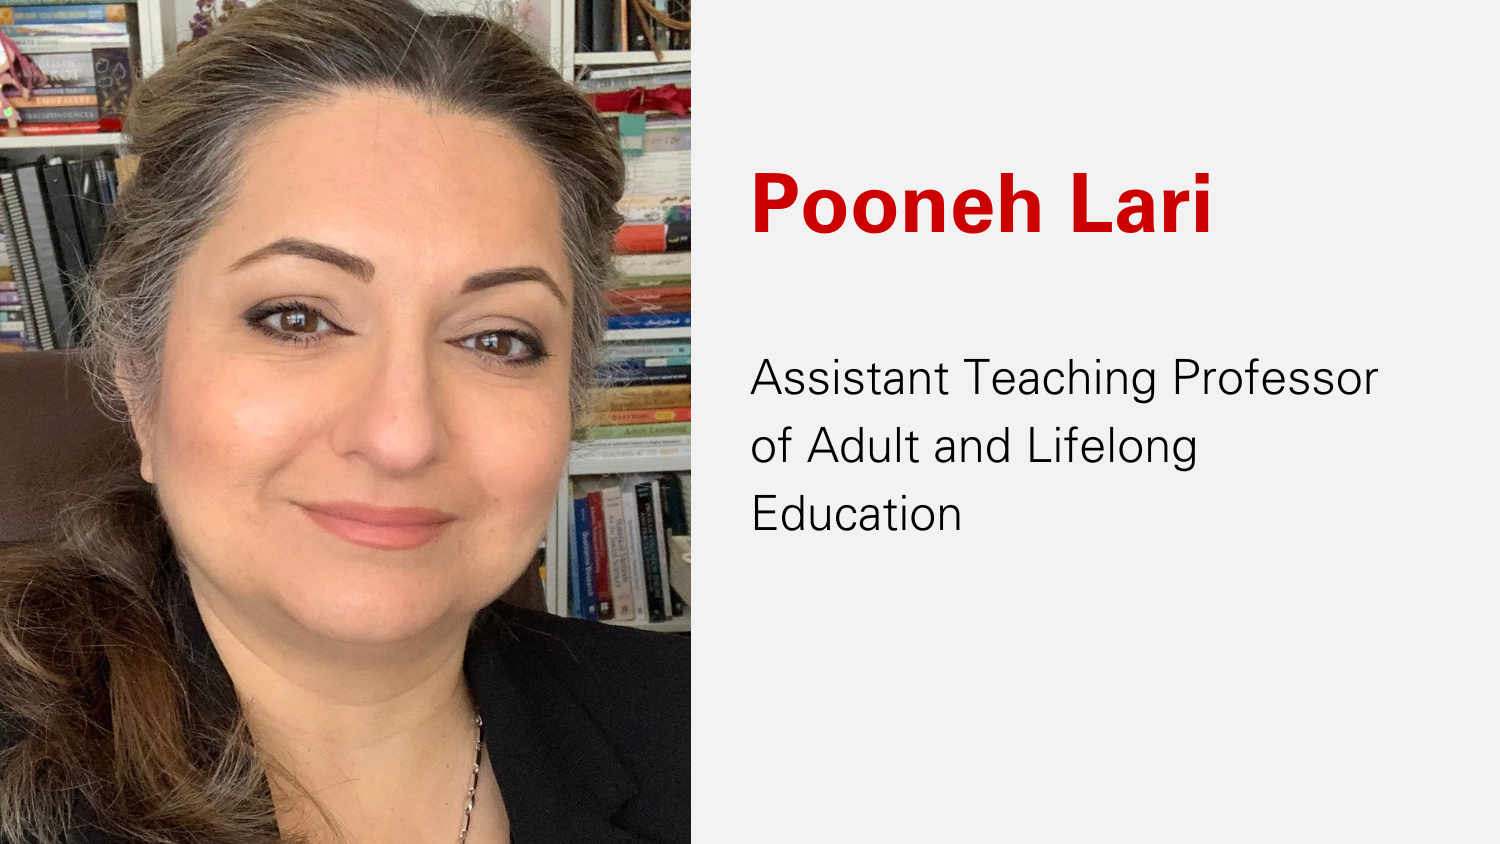 Photo of Pooneh Lari with title: Assistant Teaching Professor of Adult and Lifelong Education